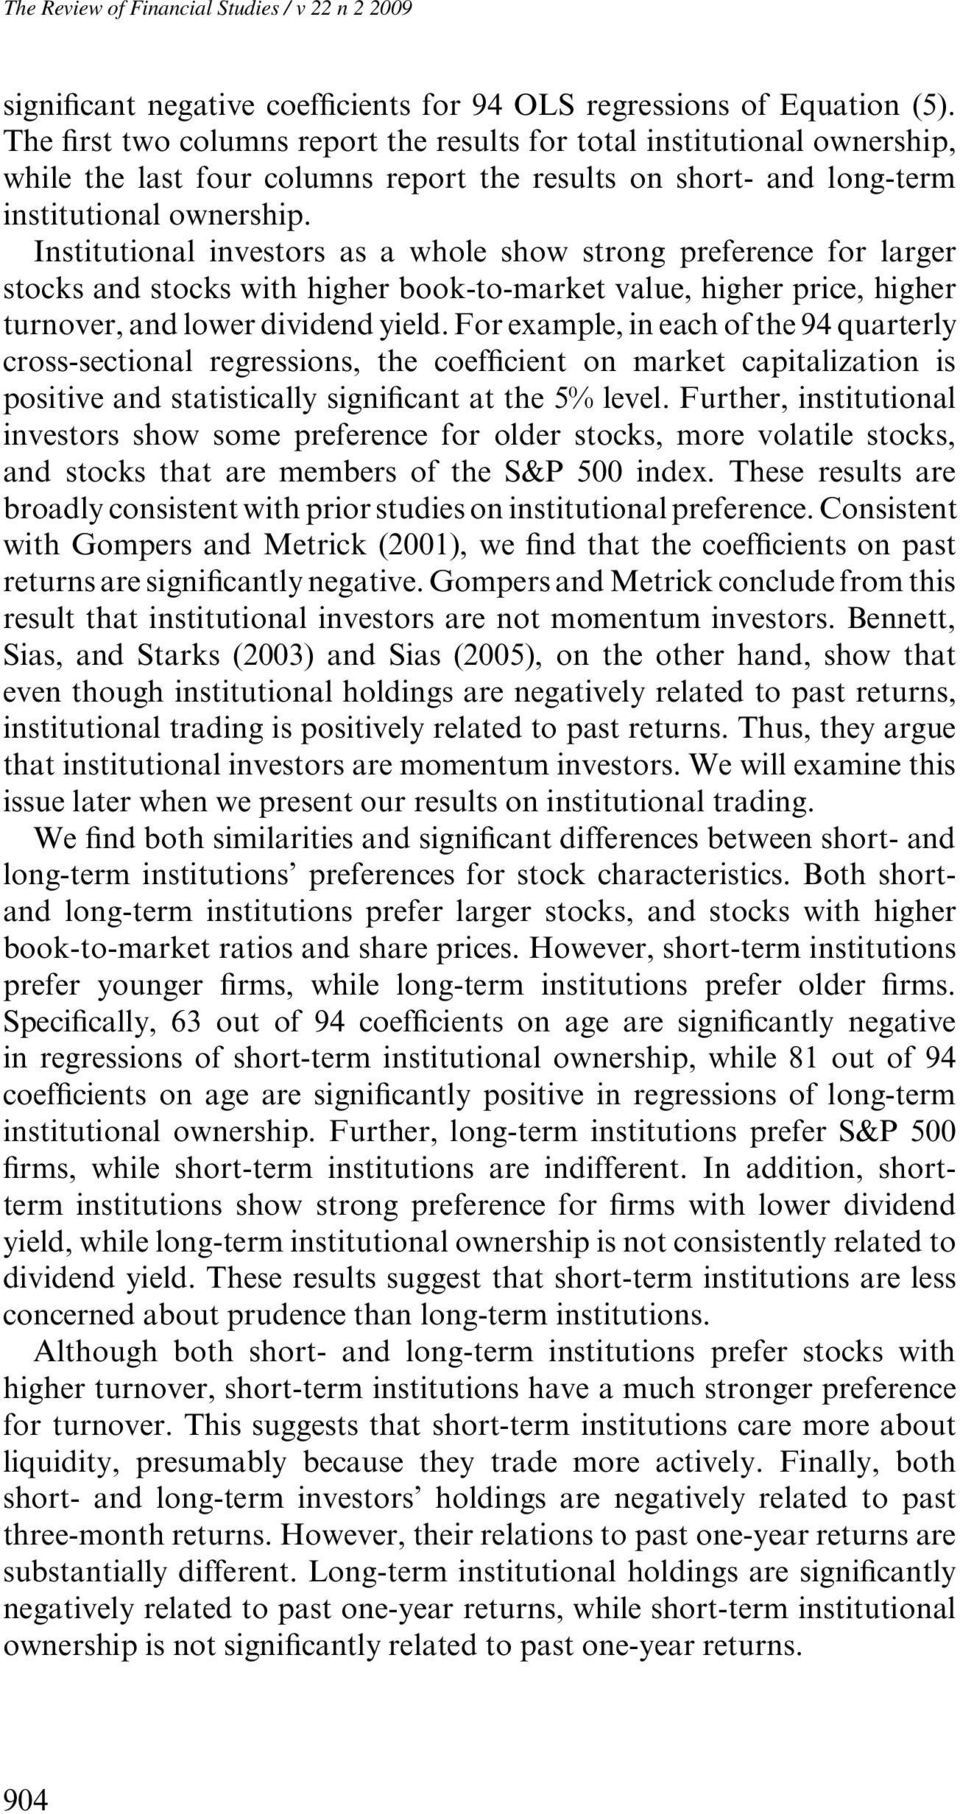 Institutional investors as a whole show strong preference for larger stocks and stocks with higher book-to-market value, higher price, higher turnover, and lower dividend yield.